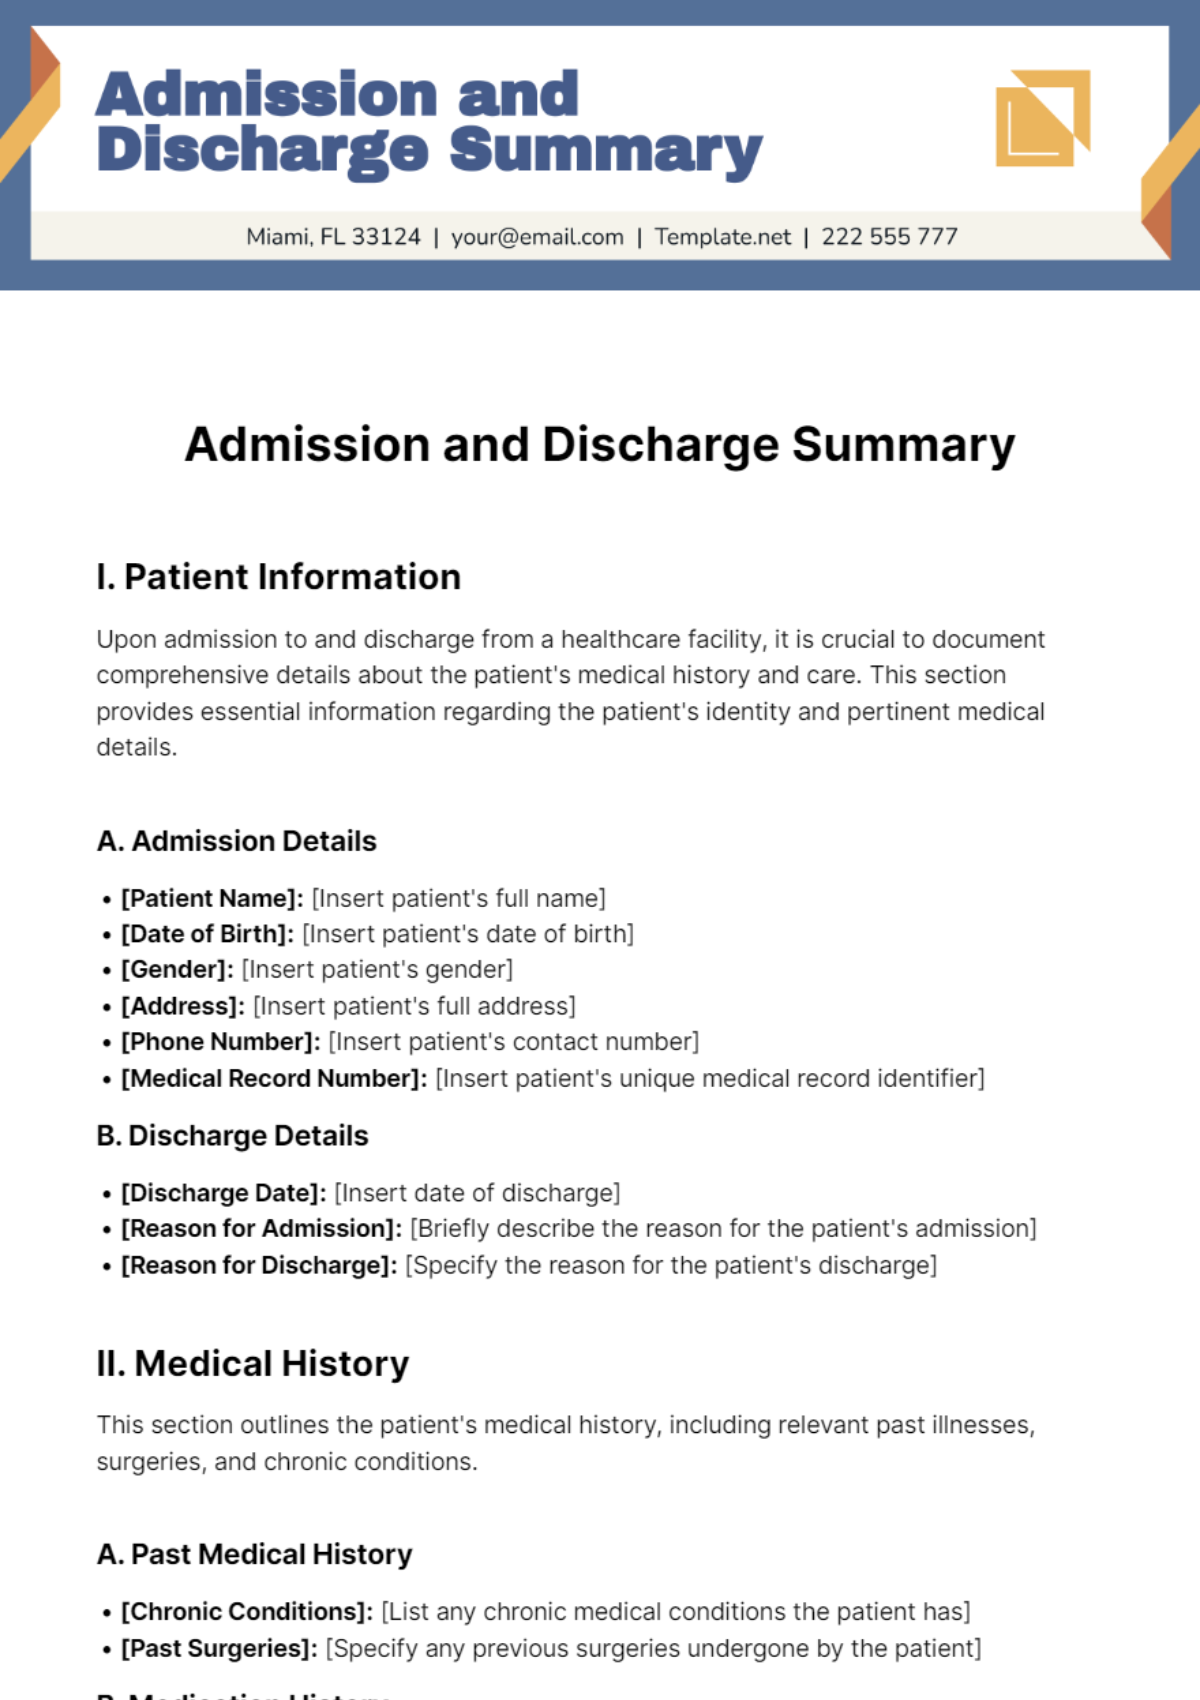 Free Admission and Discharge Summary Template